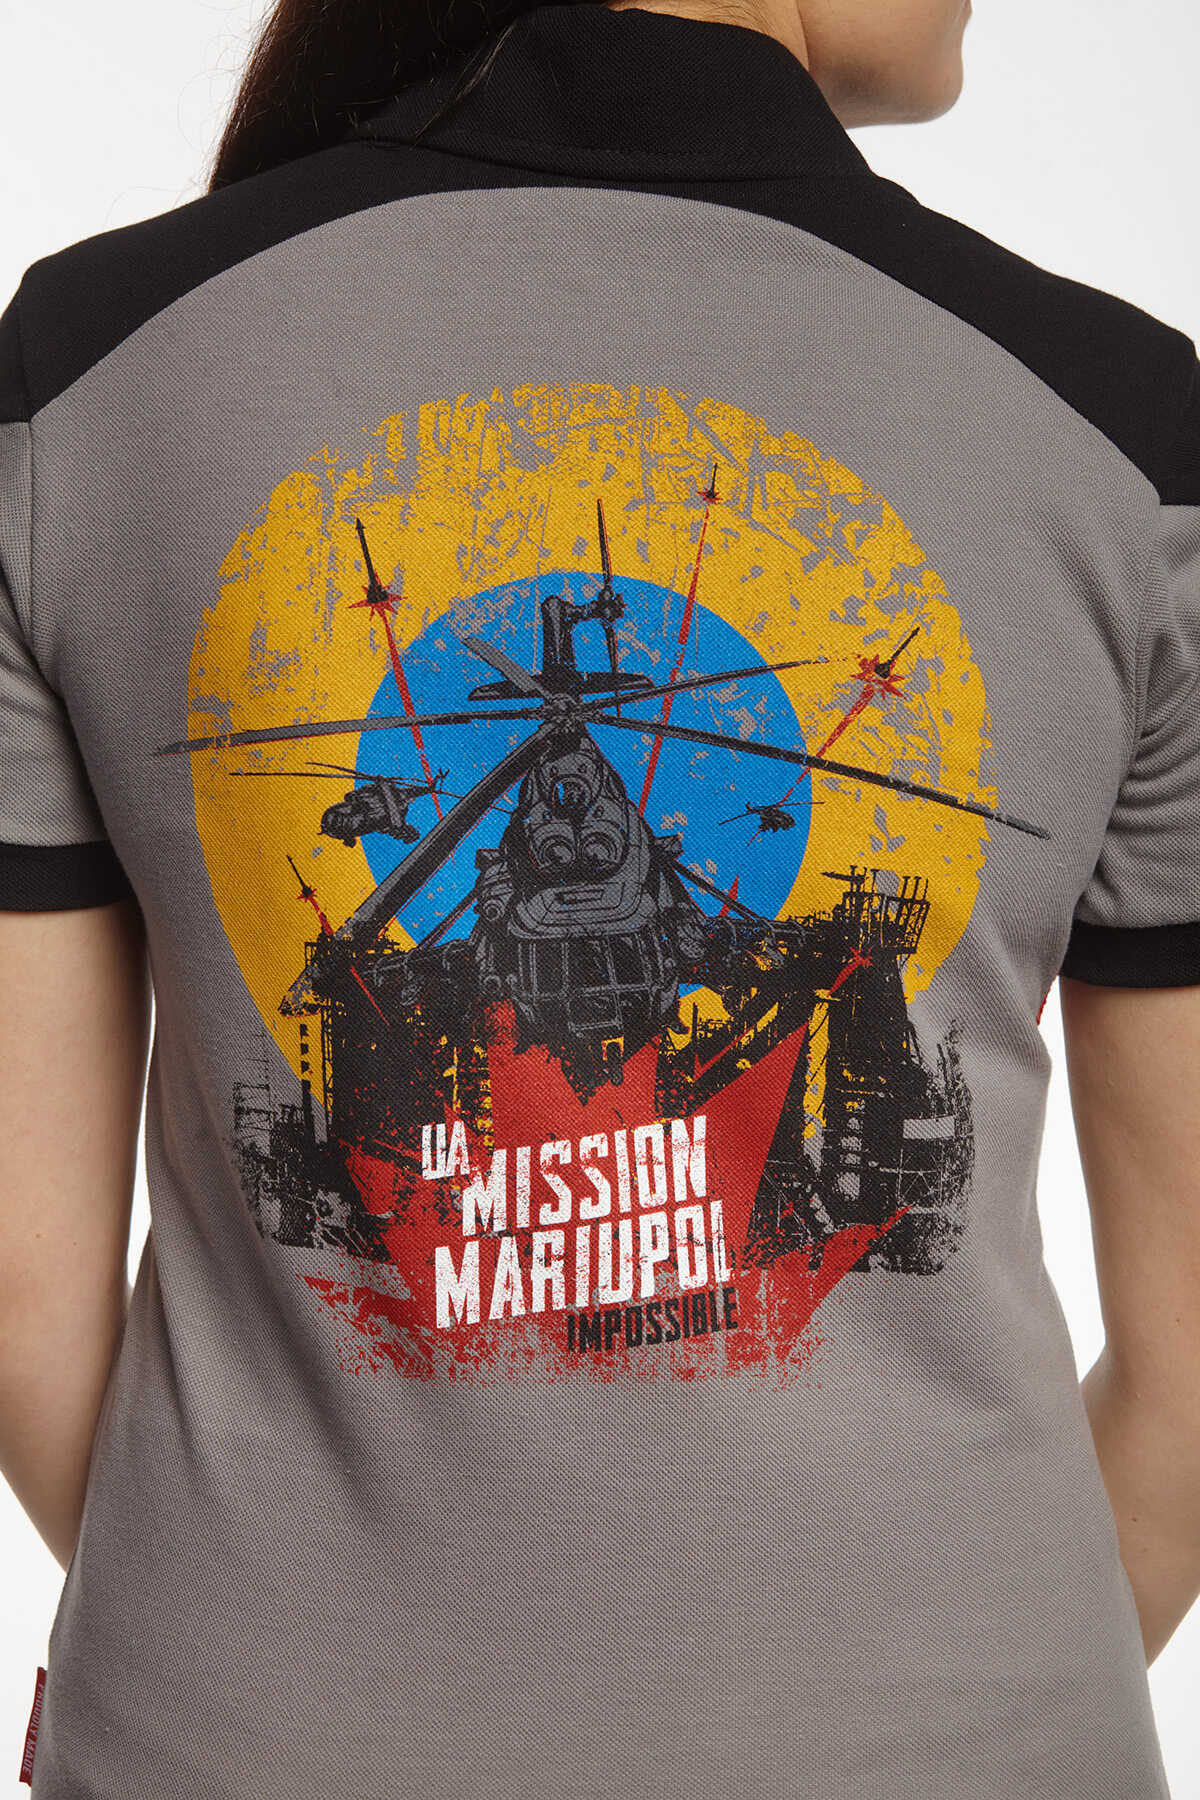 Women's Polo Mission Mariupol. Color dark gray. 
Technique of prints applied: silkscreen printing, embroidery.